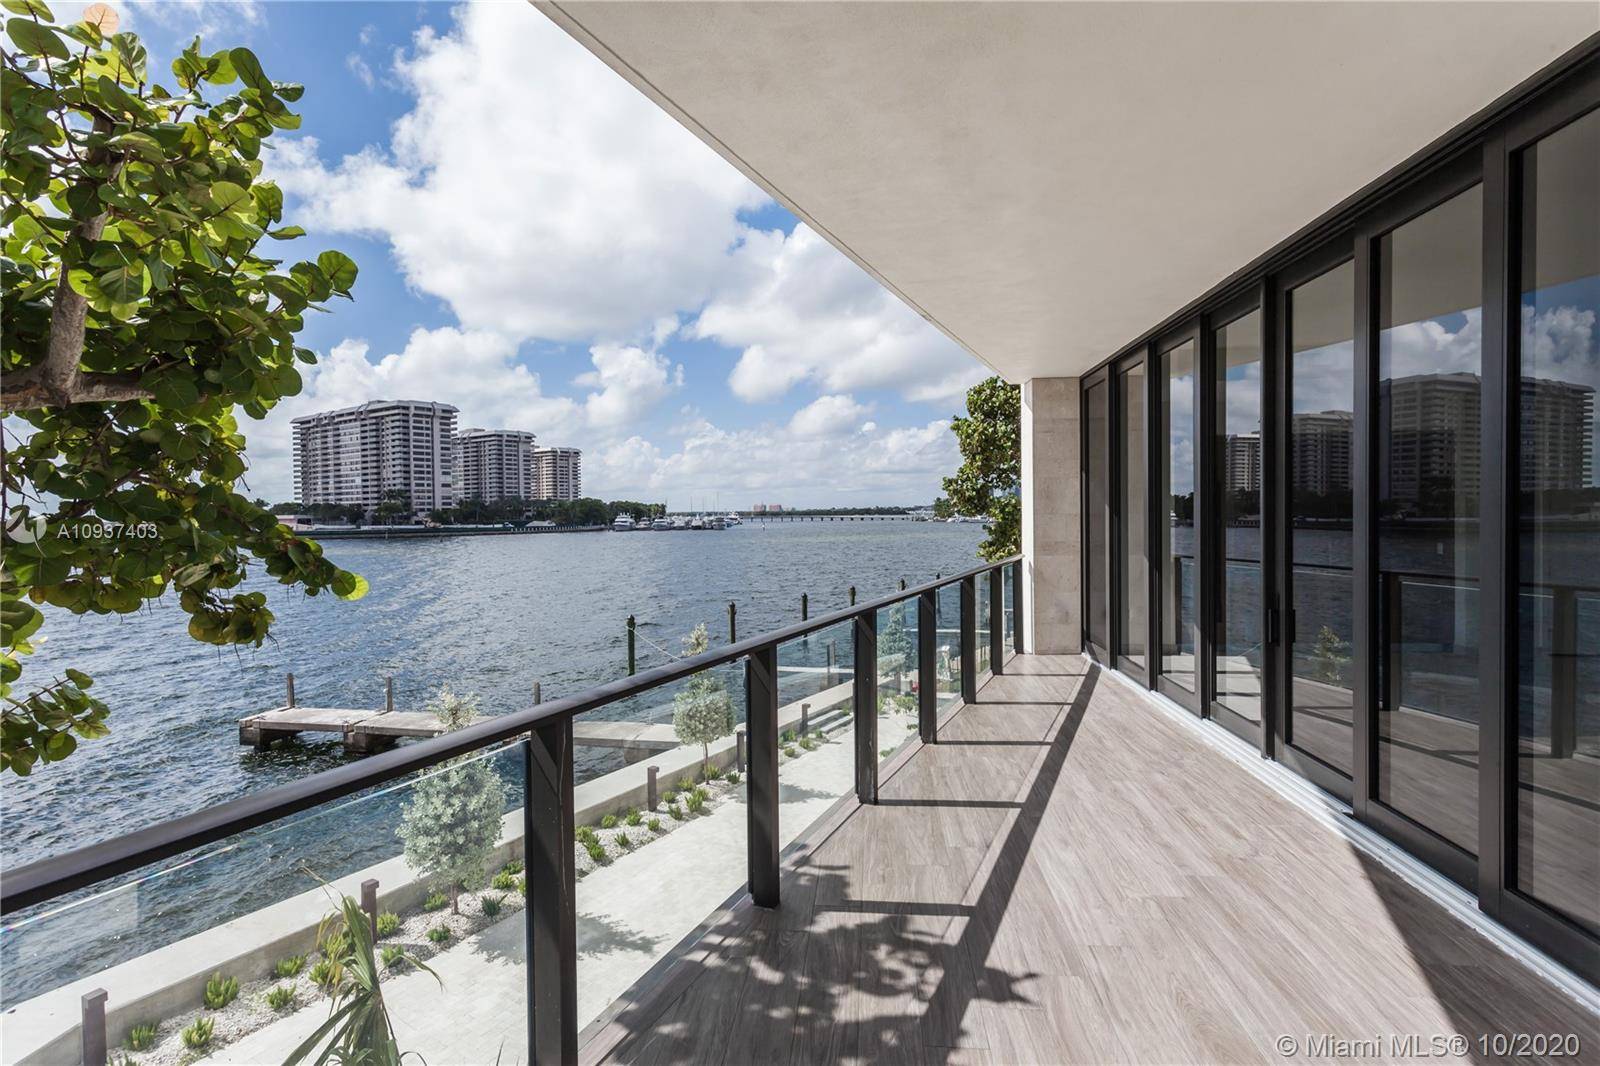 Stunning water views envelope this spacious four bedroom, five and a half bath residence at The Fairchild Coconut Grove.